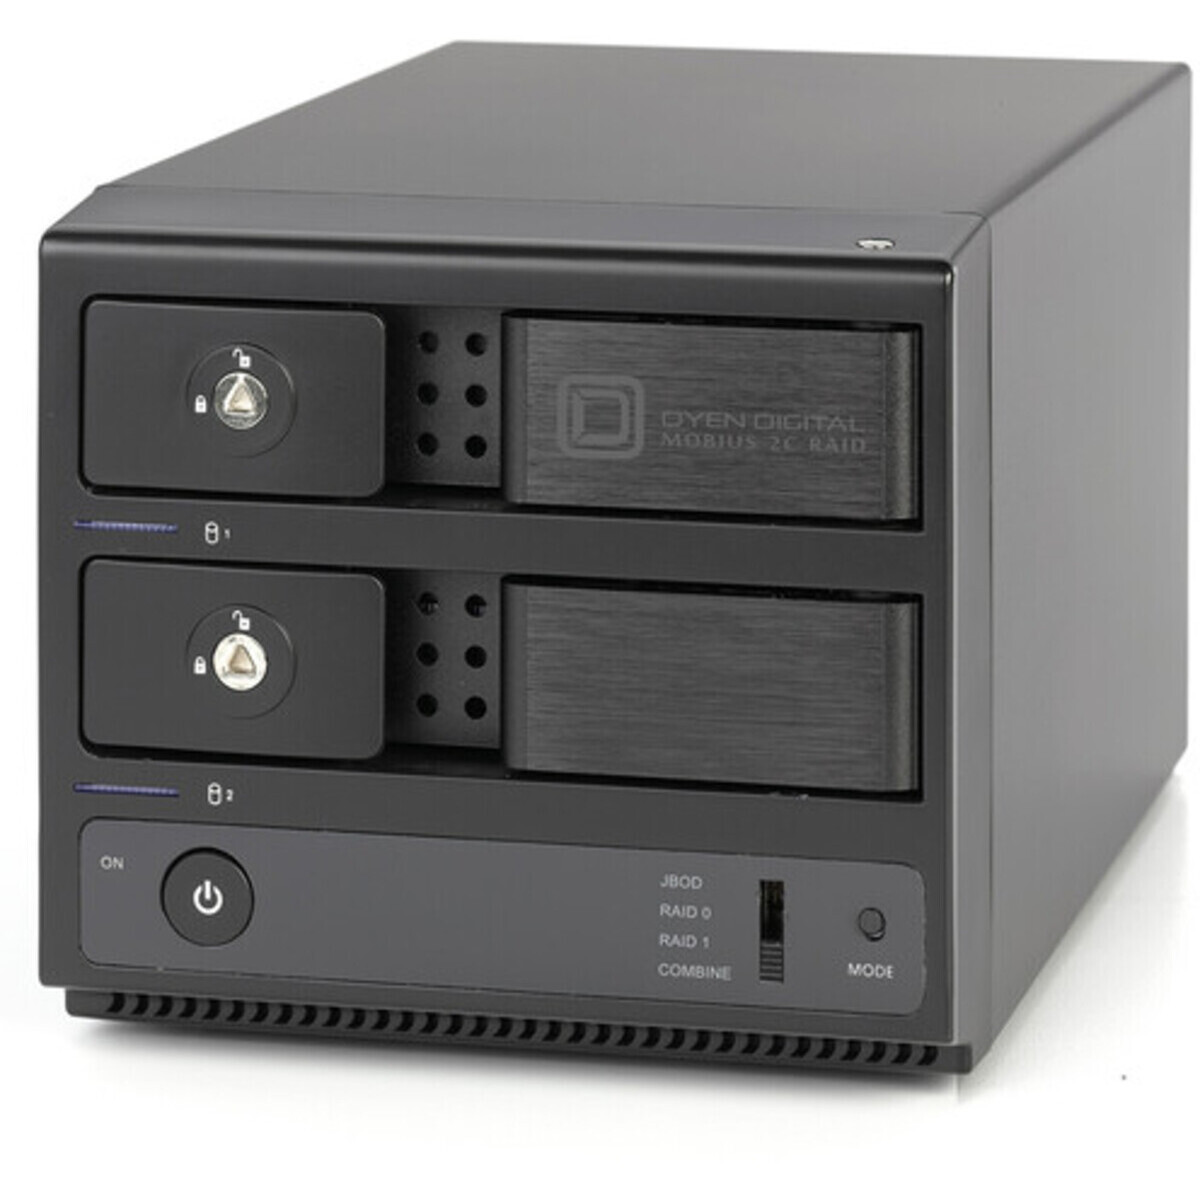 OYEN Mobius 2C DAS - Direct Attached Storage Device Burn-In Tested Configurations